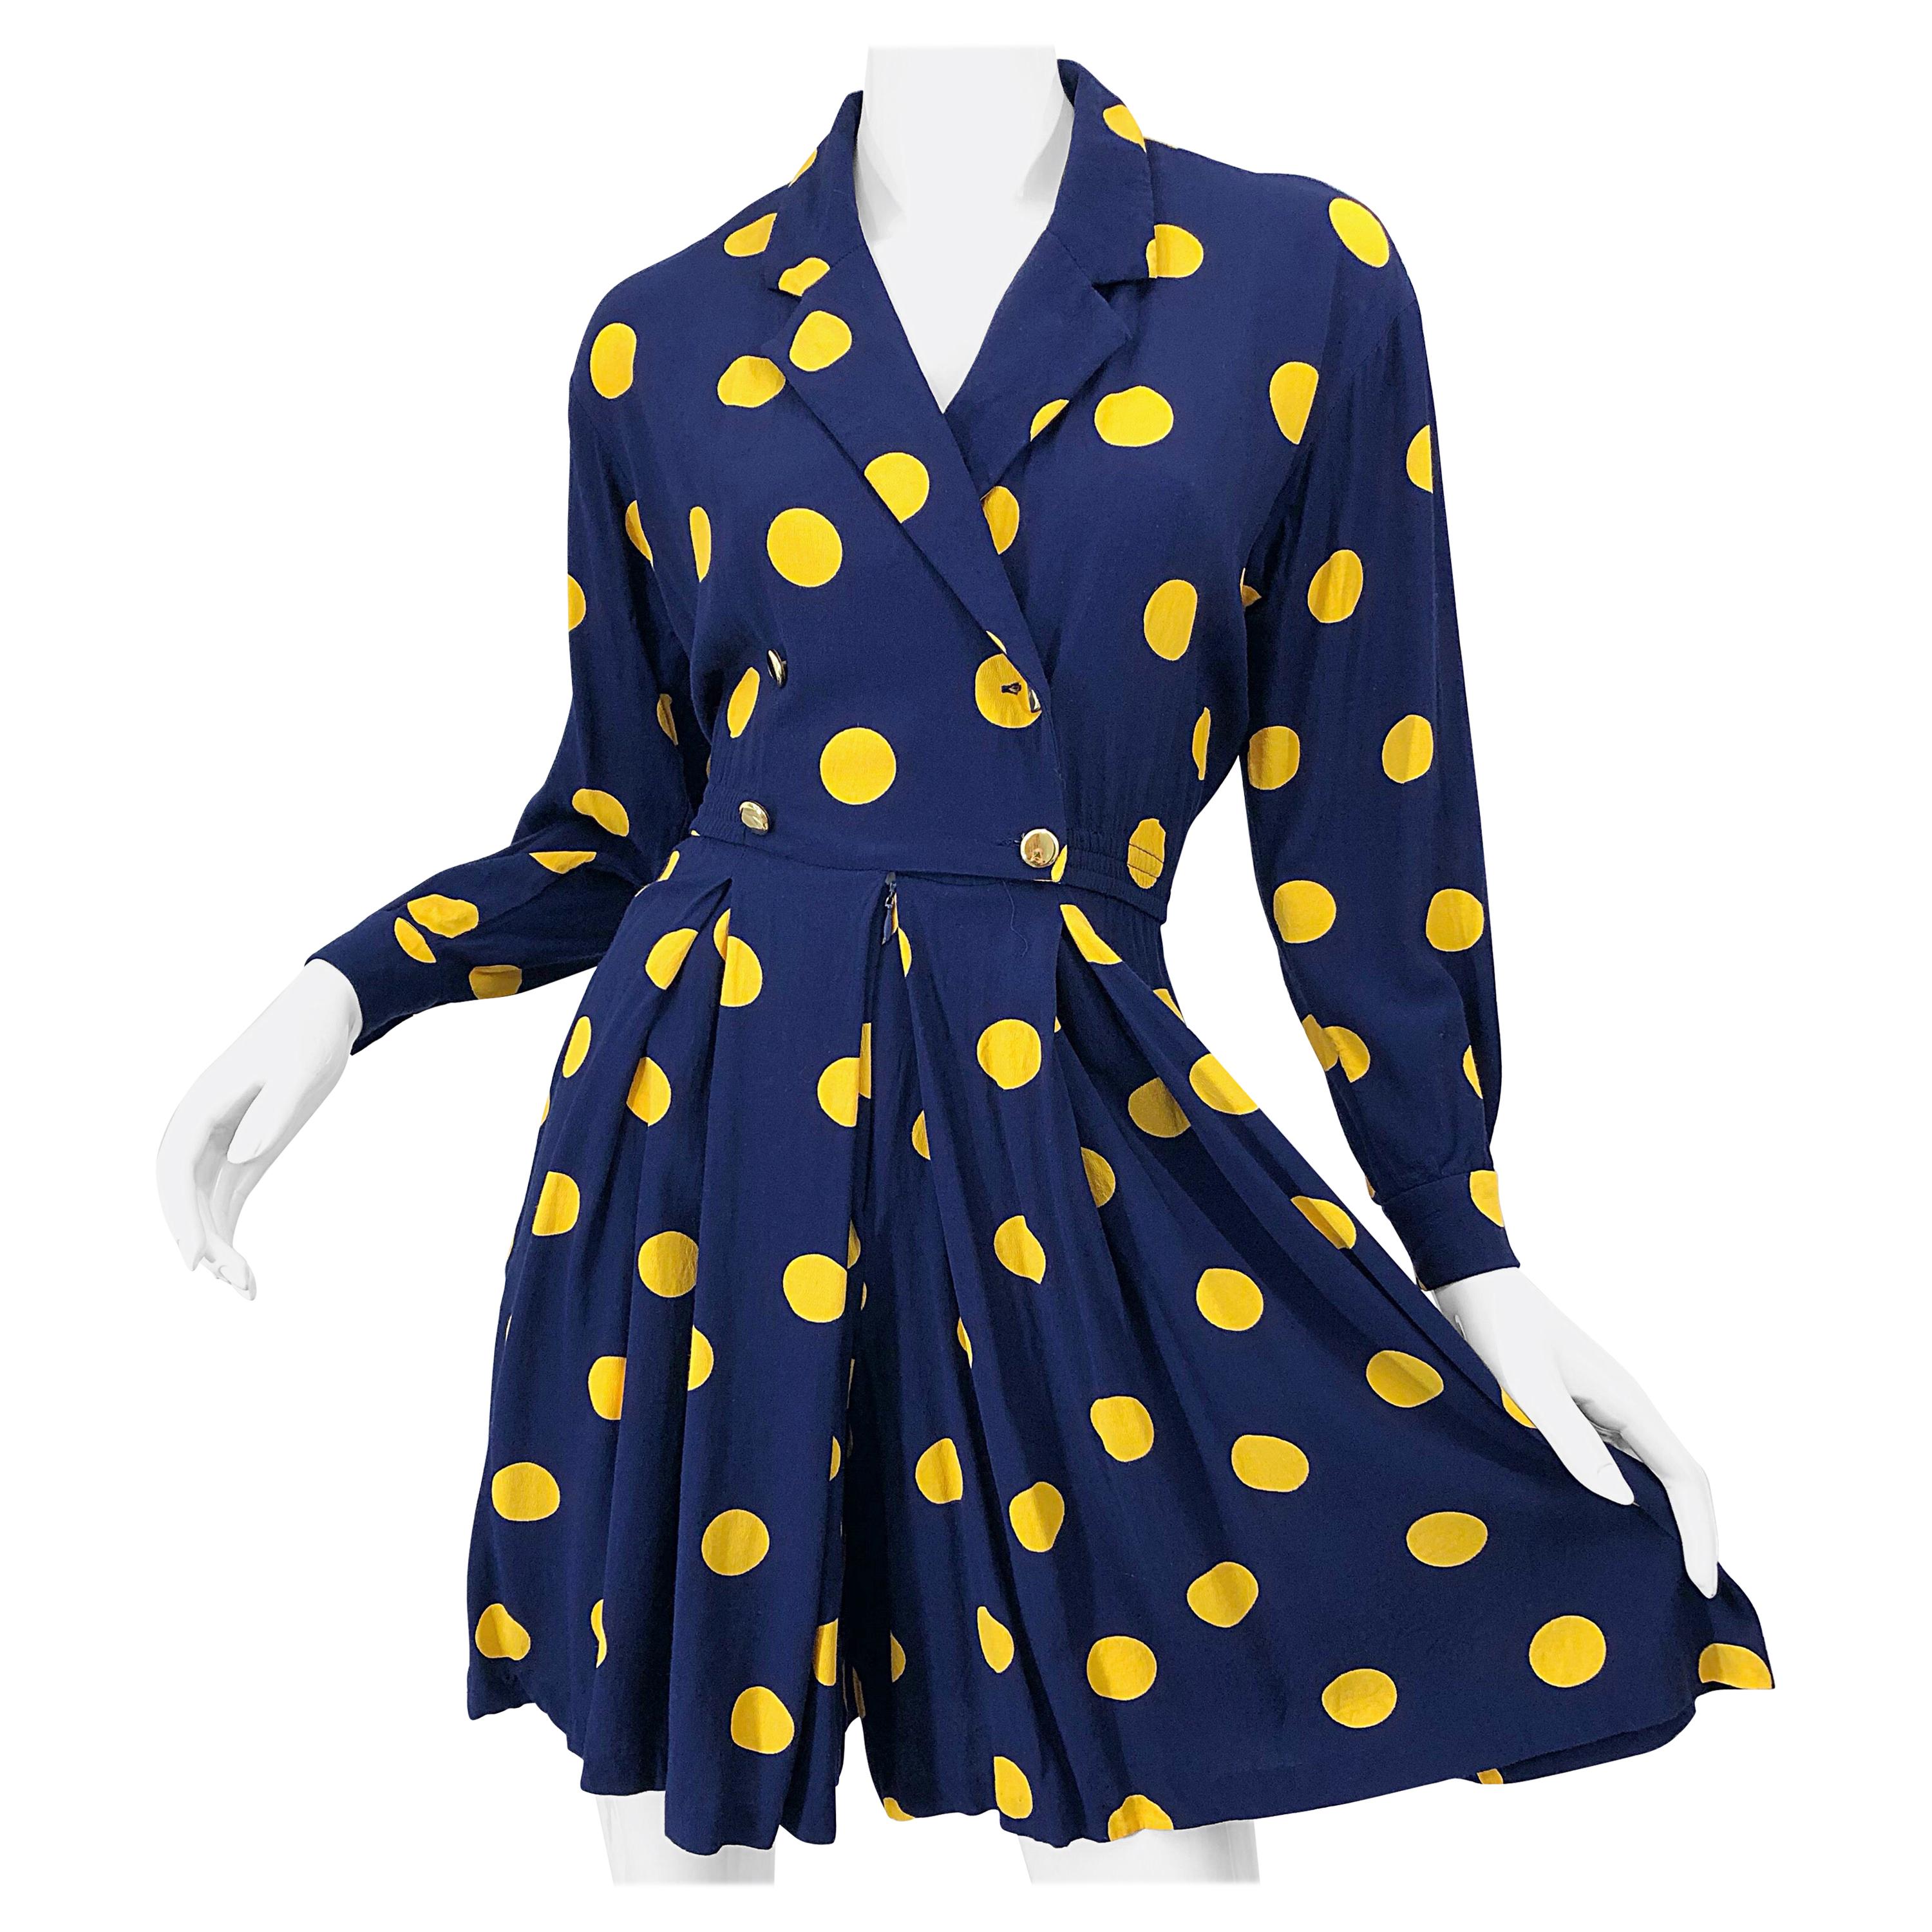 Size 8 Romper Late 1980s Navy Blue and Yellow Polka Dot 80s Vintage Romper